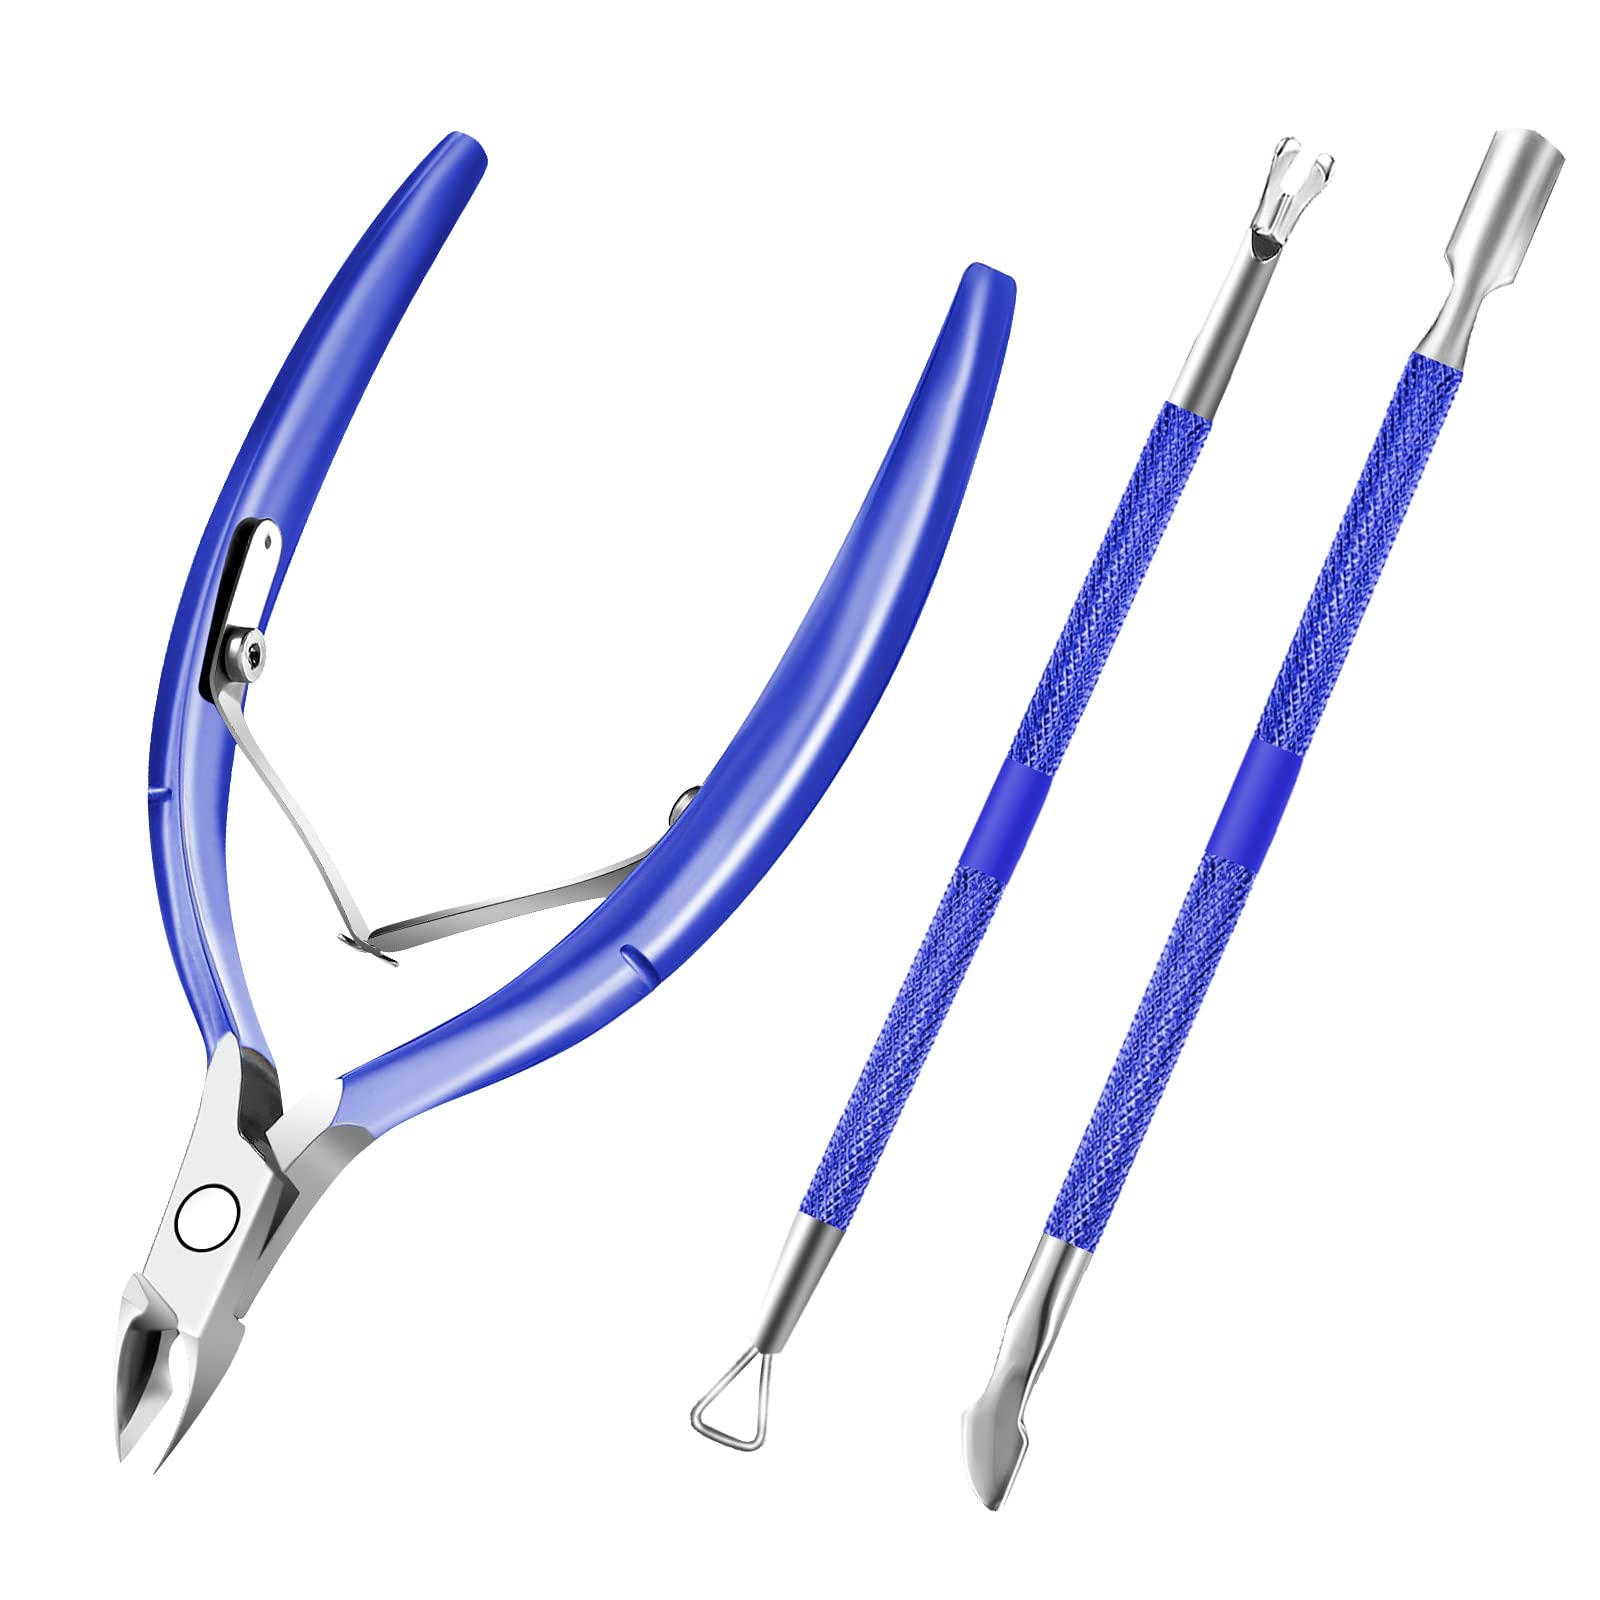 Cuticle nippers Manicure cutter dead skin removal sharpening Olton